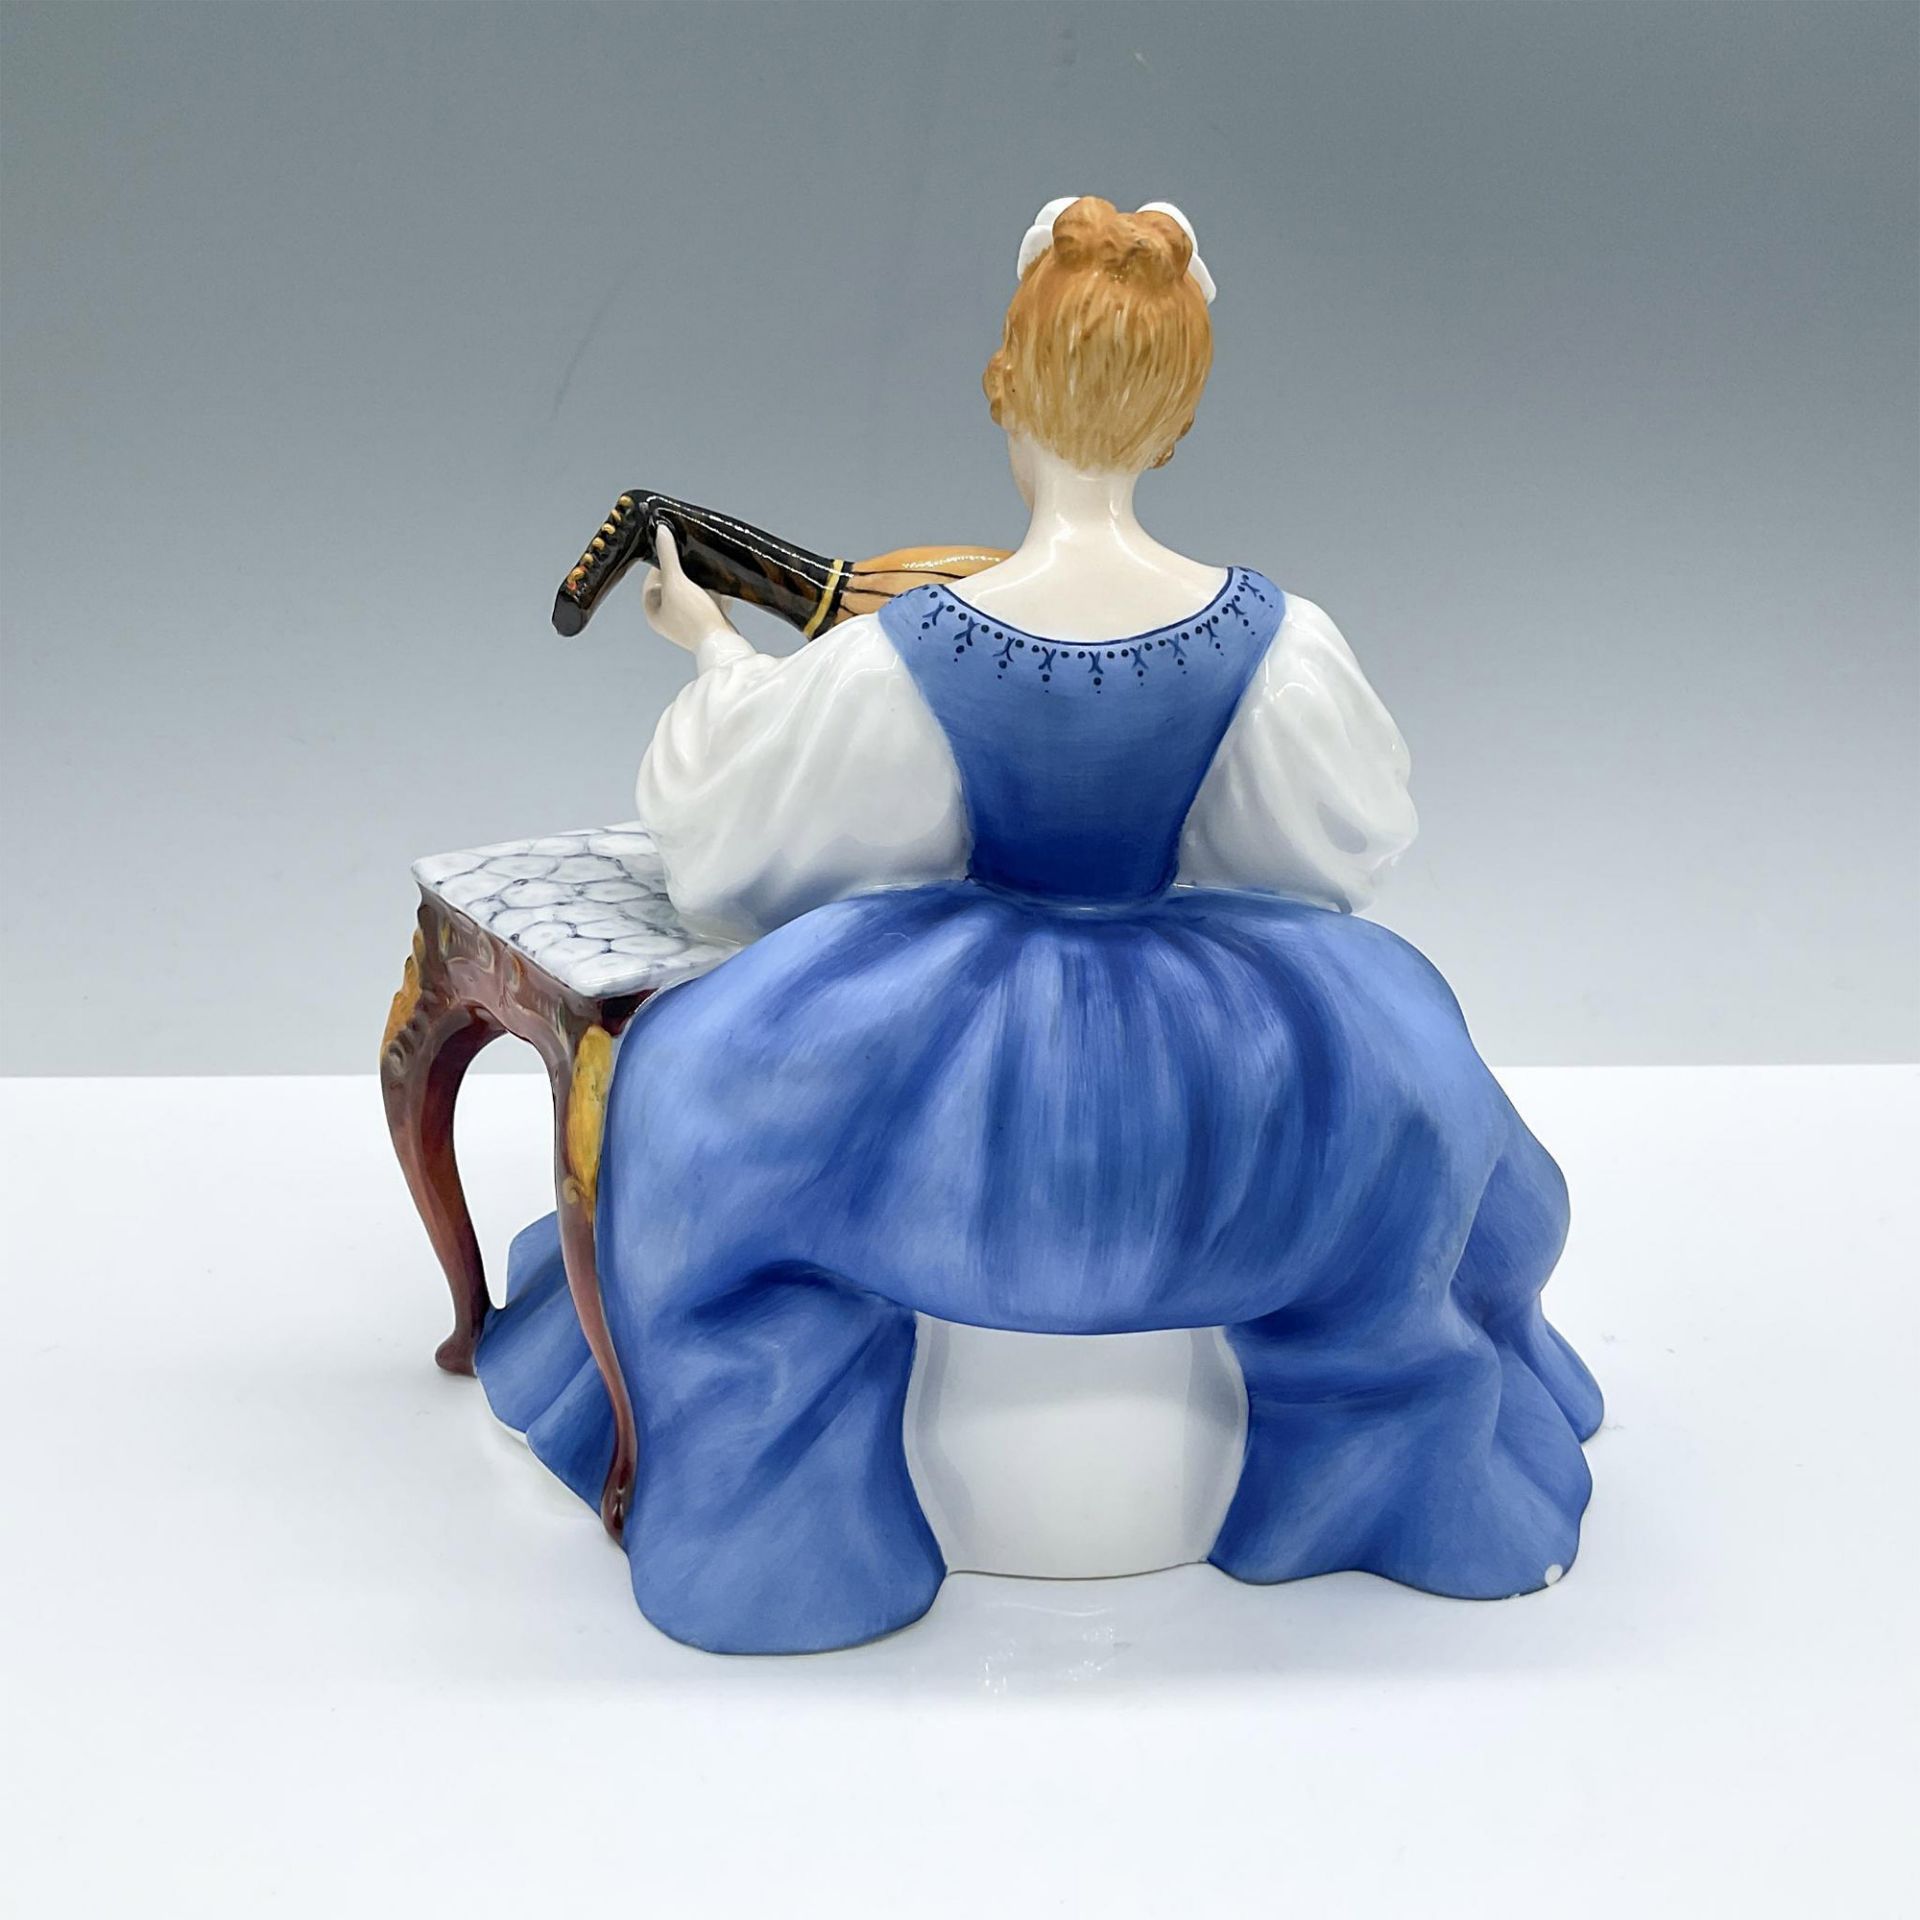 Lute - HN2431 - Royal Doulton Figurine - Image 2 of 3